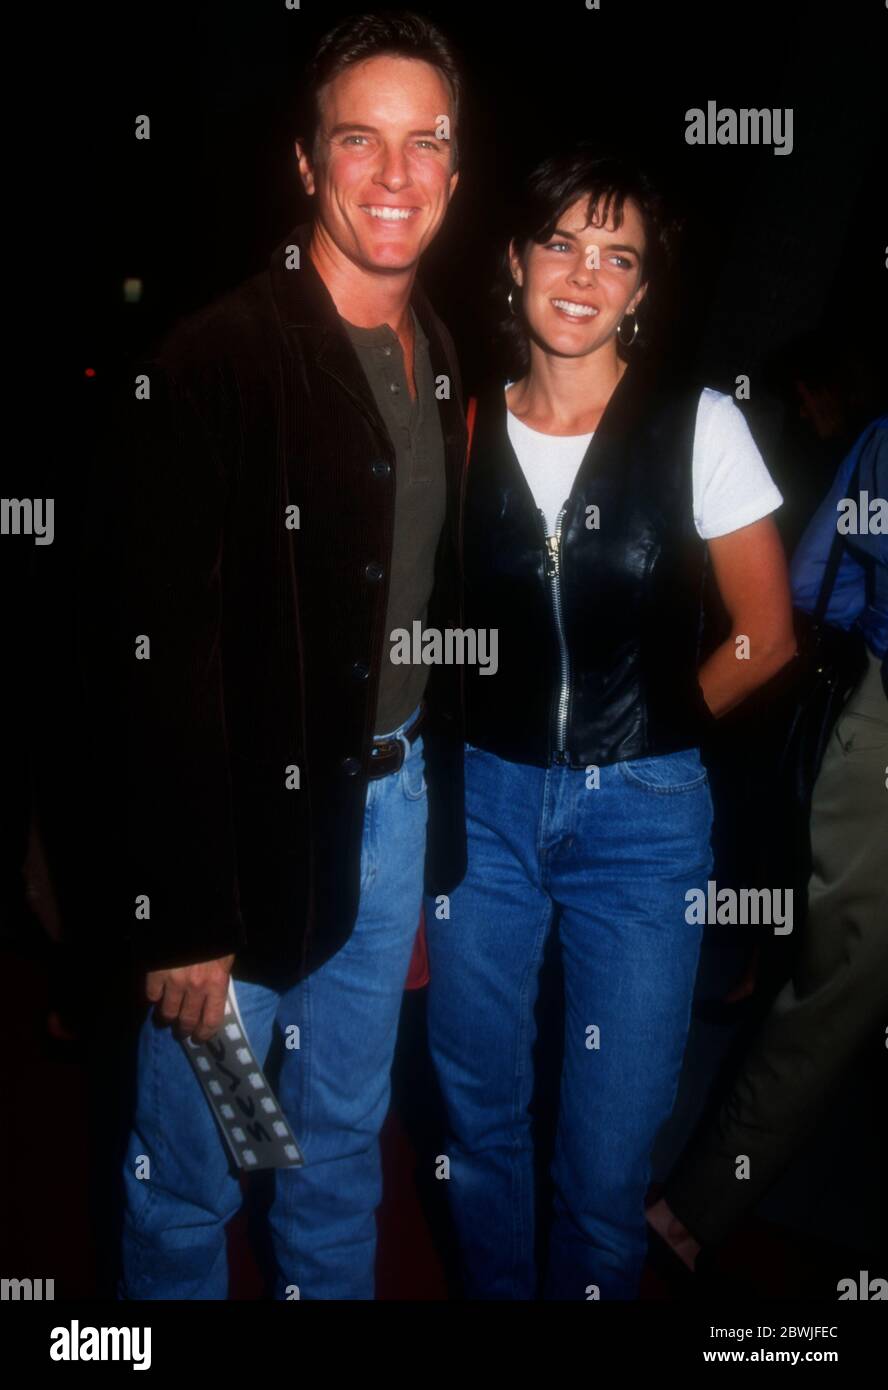 Beverly Hills, California, USA 19th September 1995 Actor Lindan Ashby and actress wife Susan Walters attend New Line Cinema's 'Seven' (aka Se7en) Premiere on September 1995 at Samuel Goldwyn Theater in Beverly Hills, California, USA. Photo by Barry King/Alamy Stock Photo Stock Photo